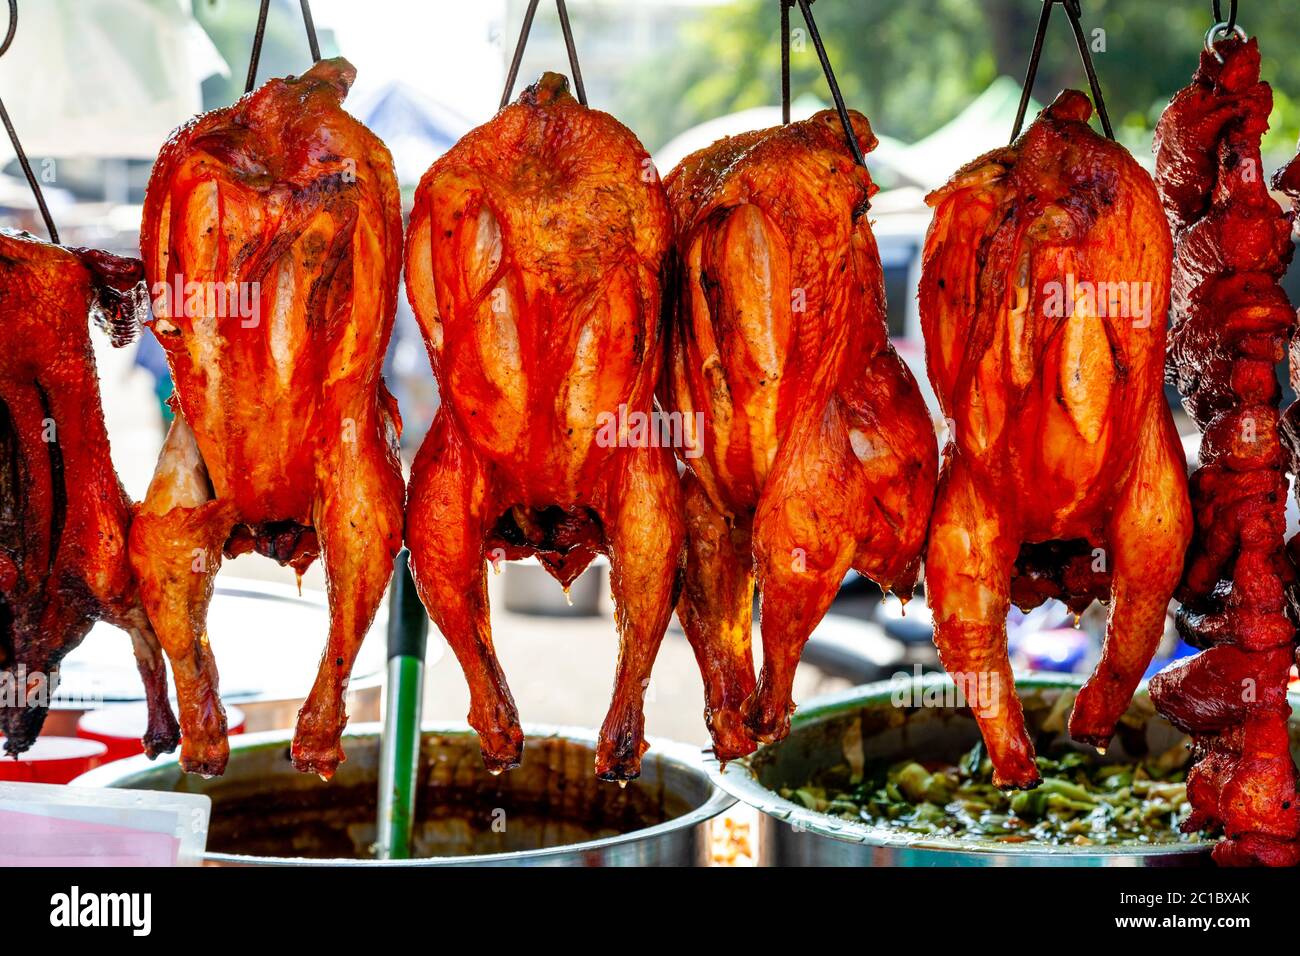 Cooked Chickens On Display At A Street Food Stall, Yangon, Myanmar. Stock Photo